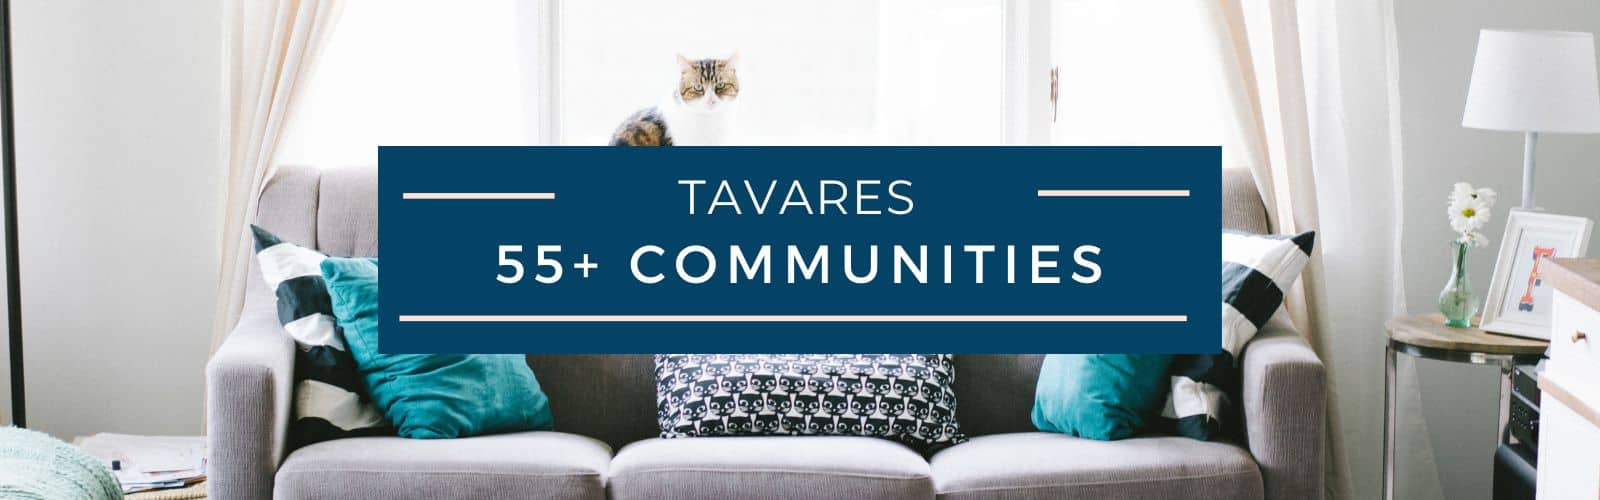 Tavares 55+ Homes for Sale